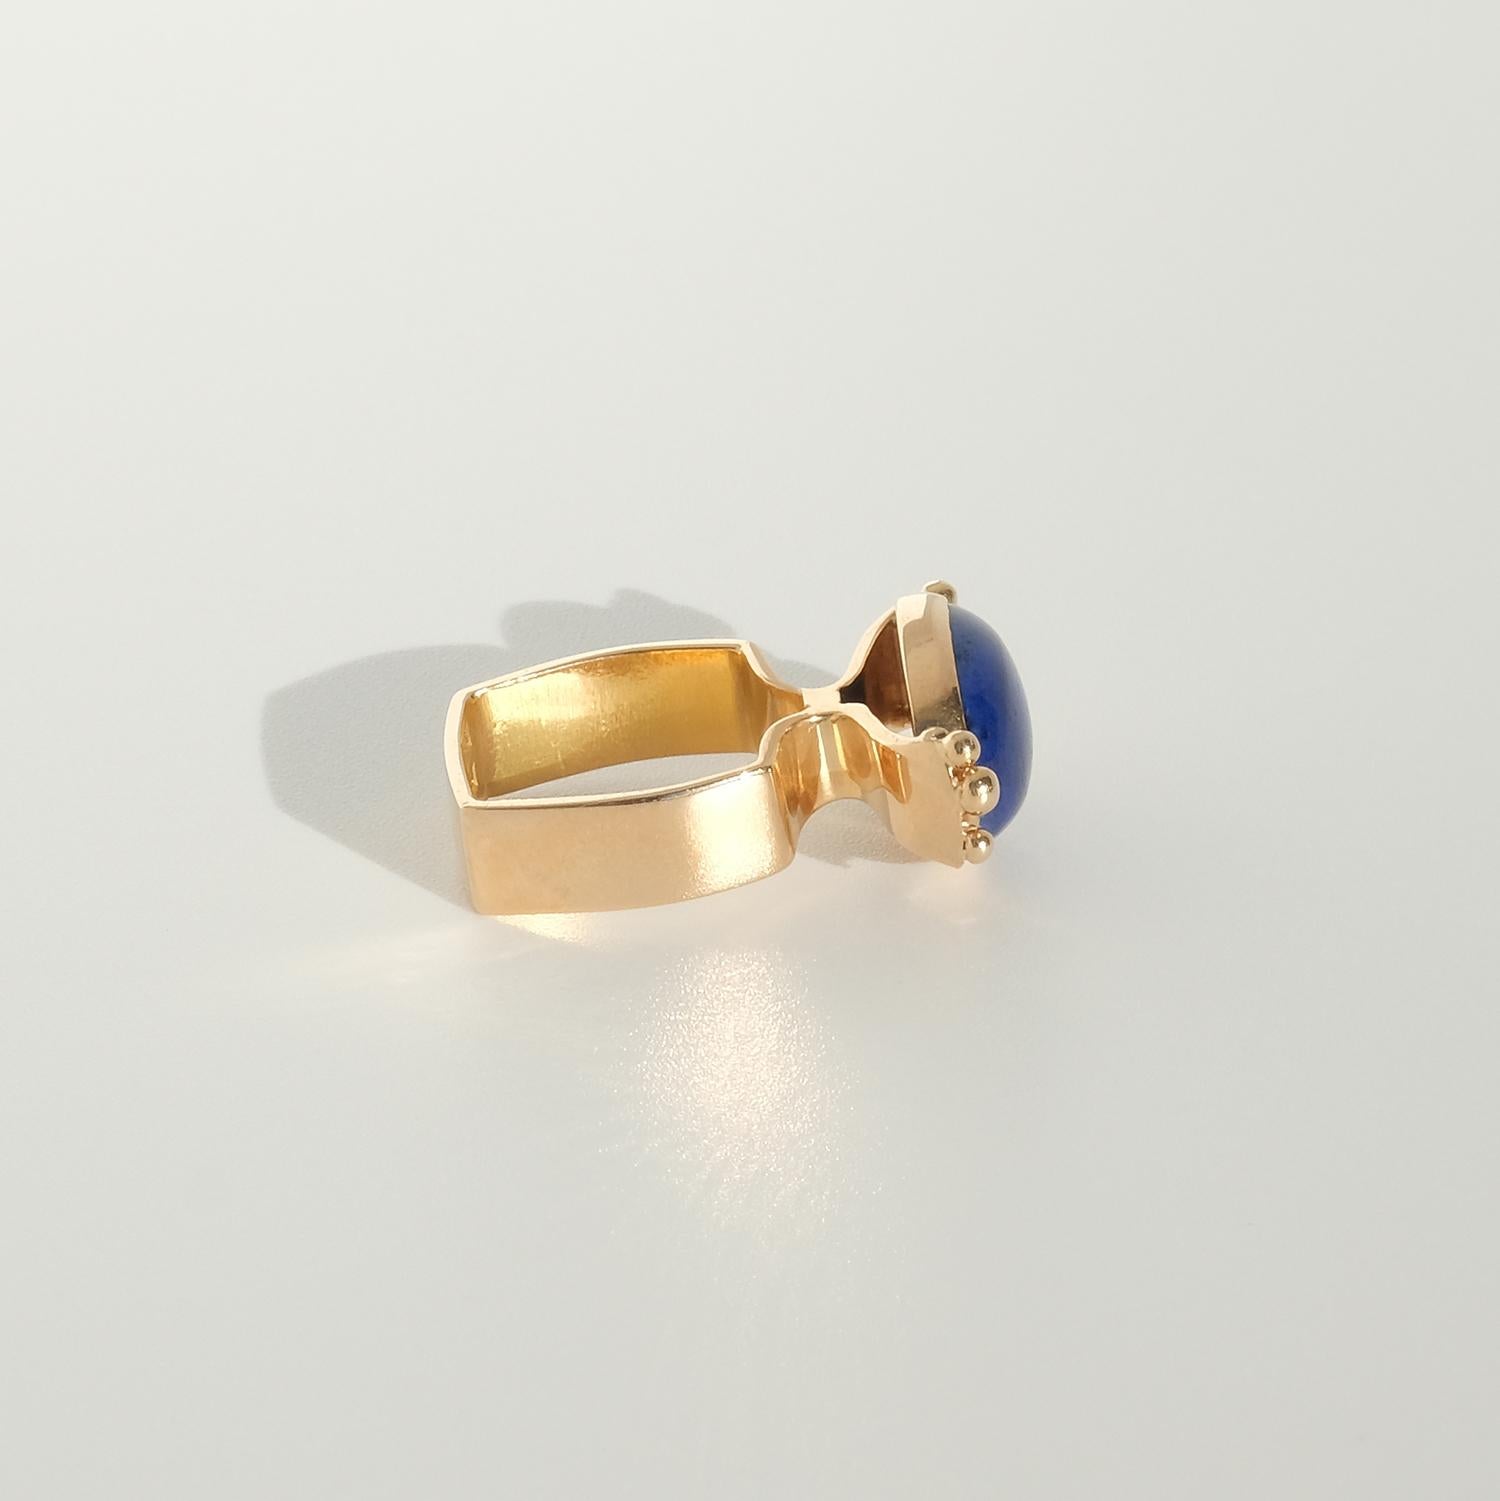 18 K Gold Ring with a Cabochon Cut Lapis Lazuli Stone, Made in 1972 For Sale 7